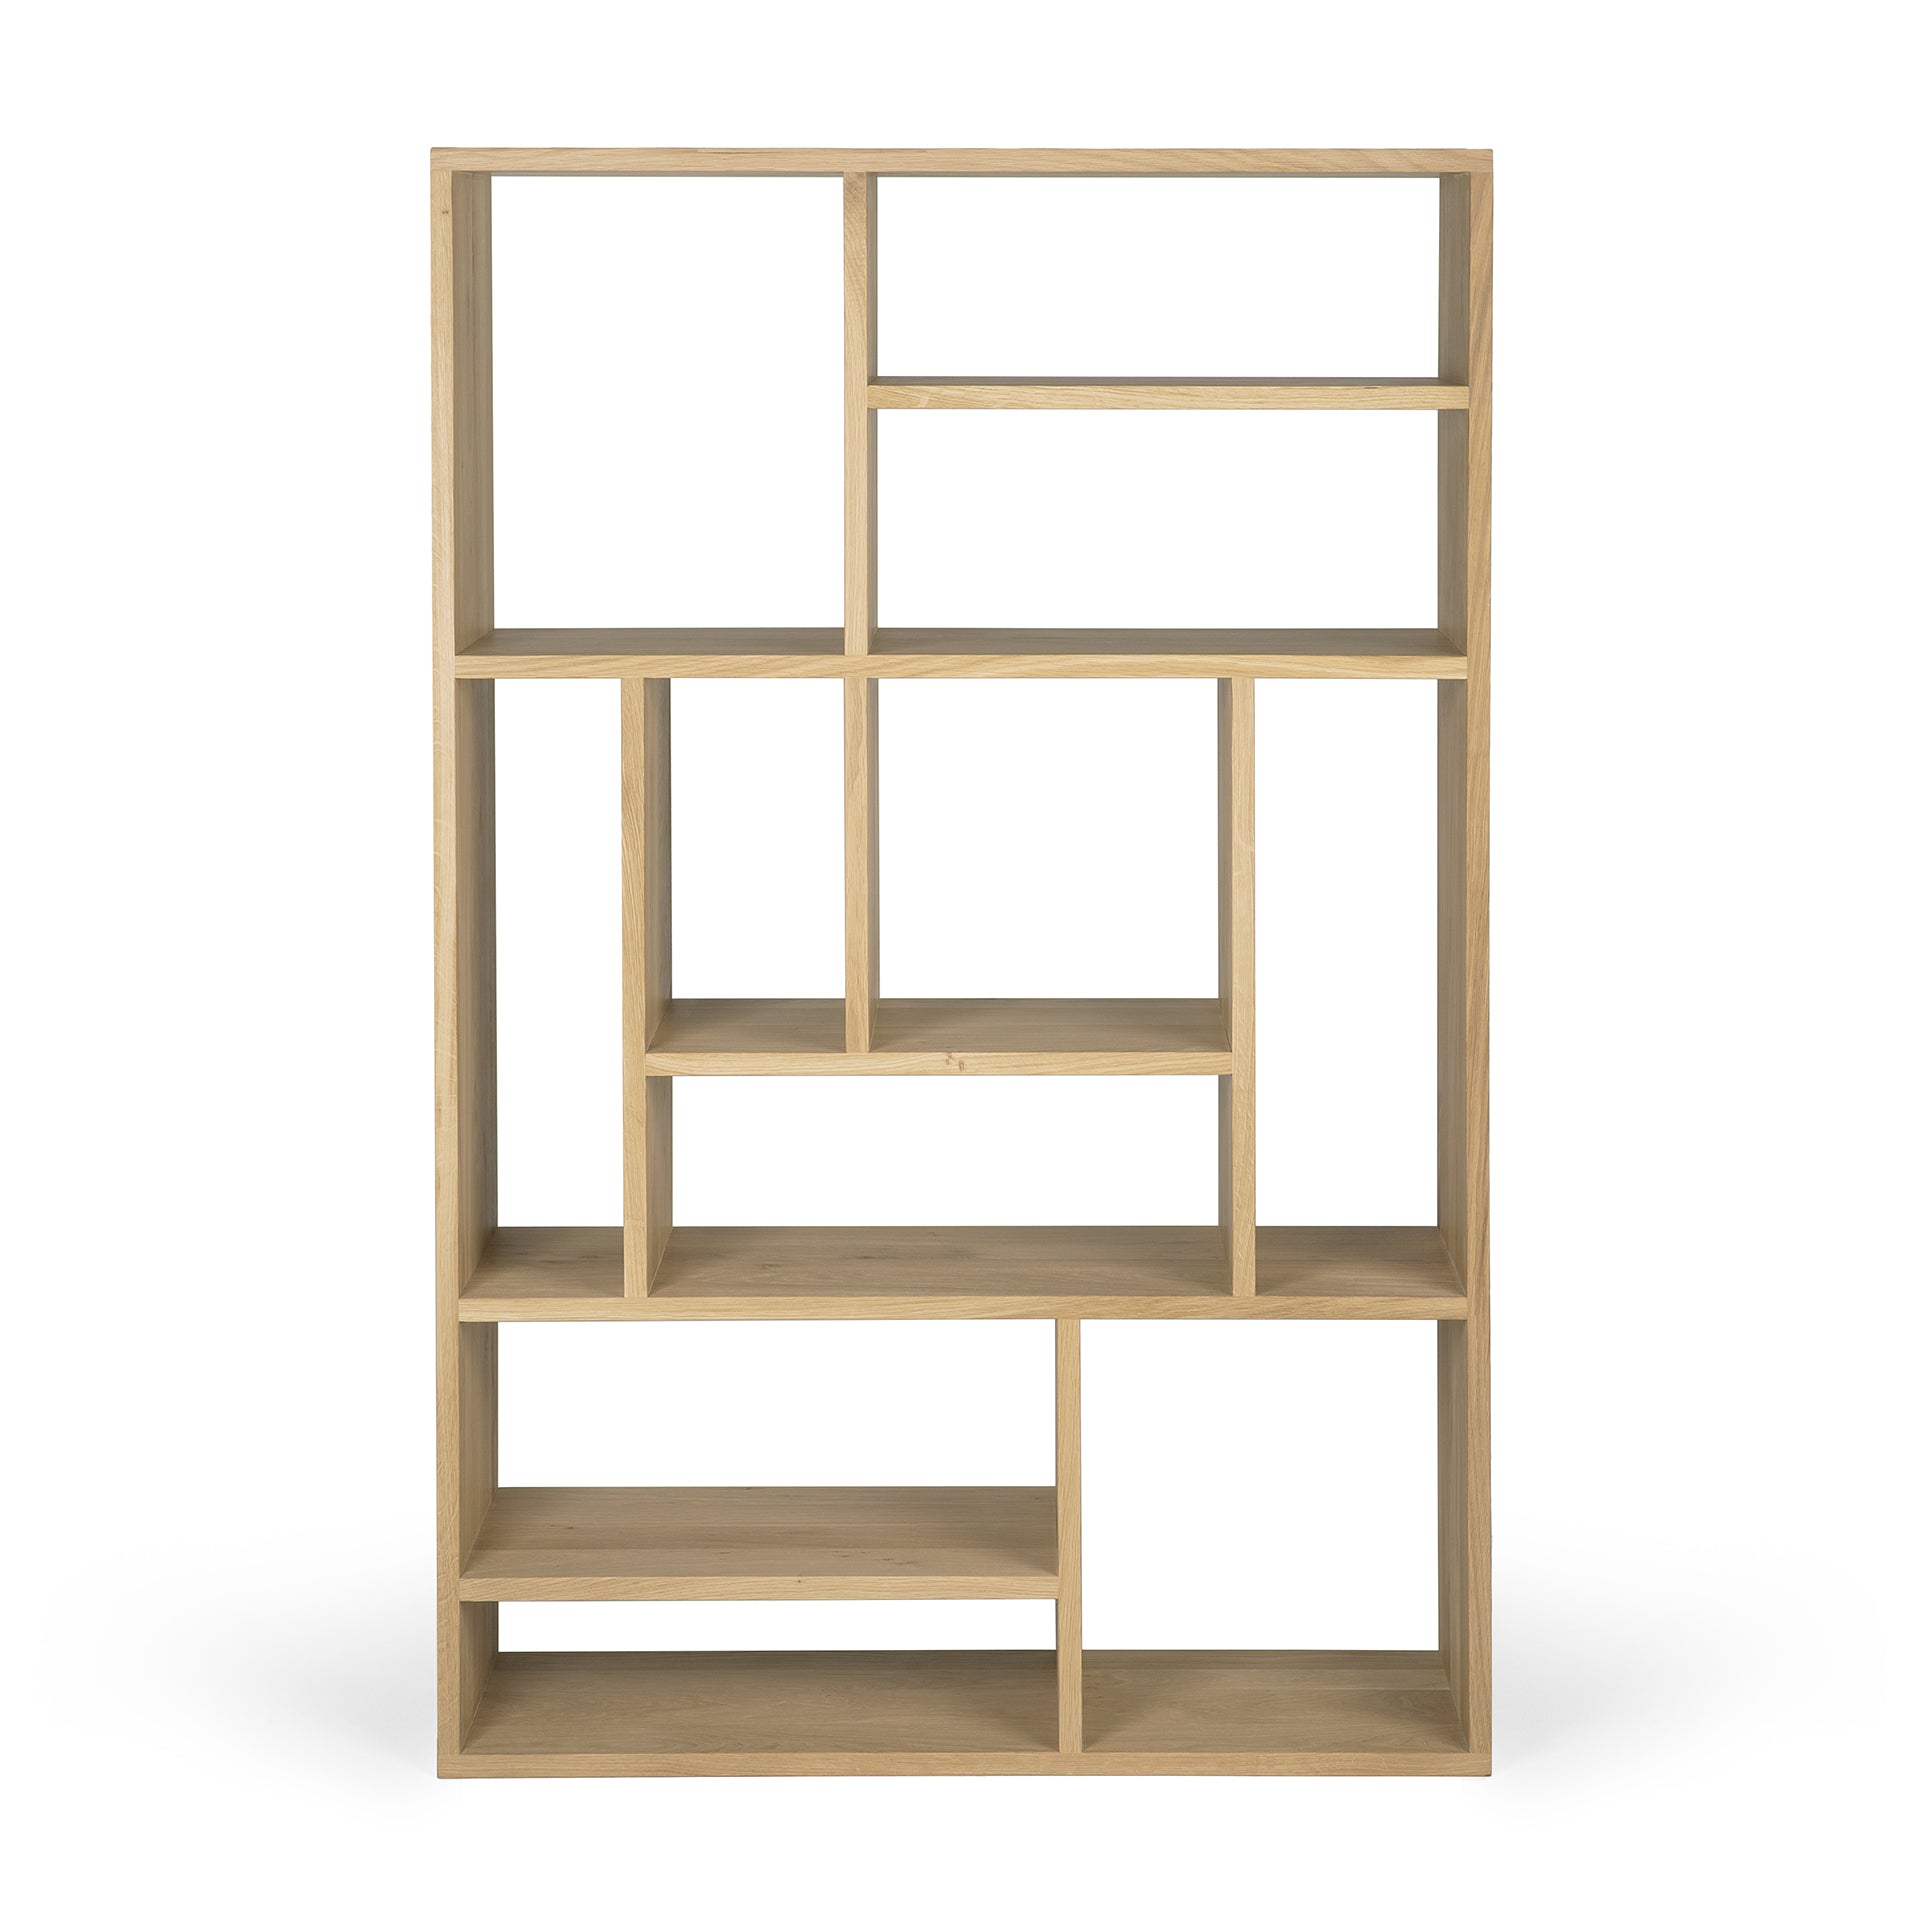 Ethnicraft Oak M Rack available from Make Your House A Home, Bendigo, Victoria, Australia